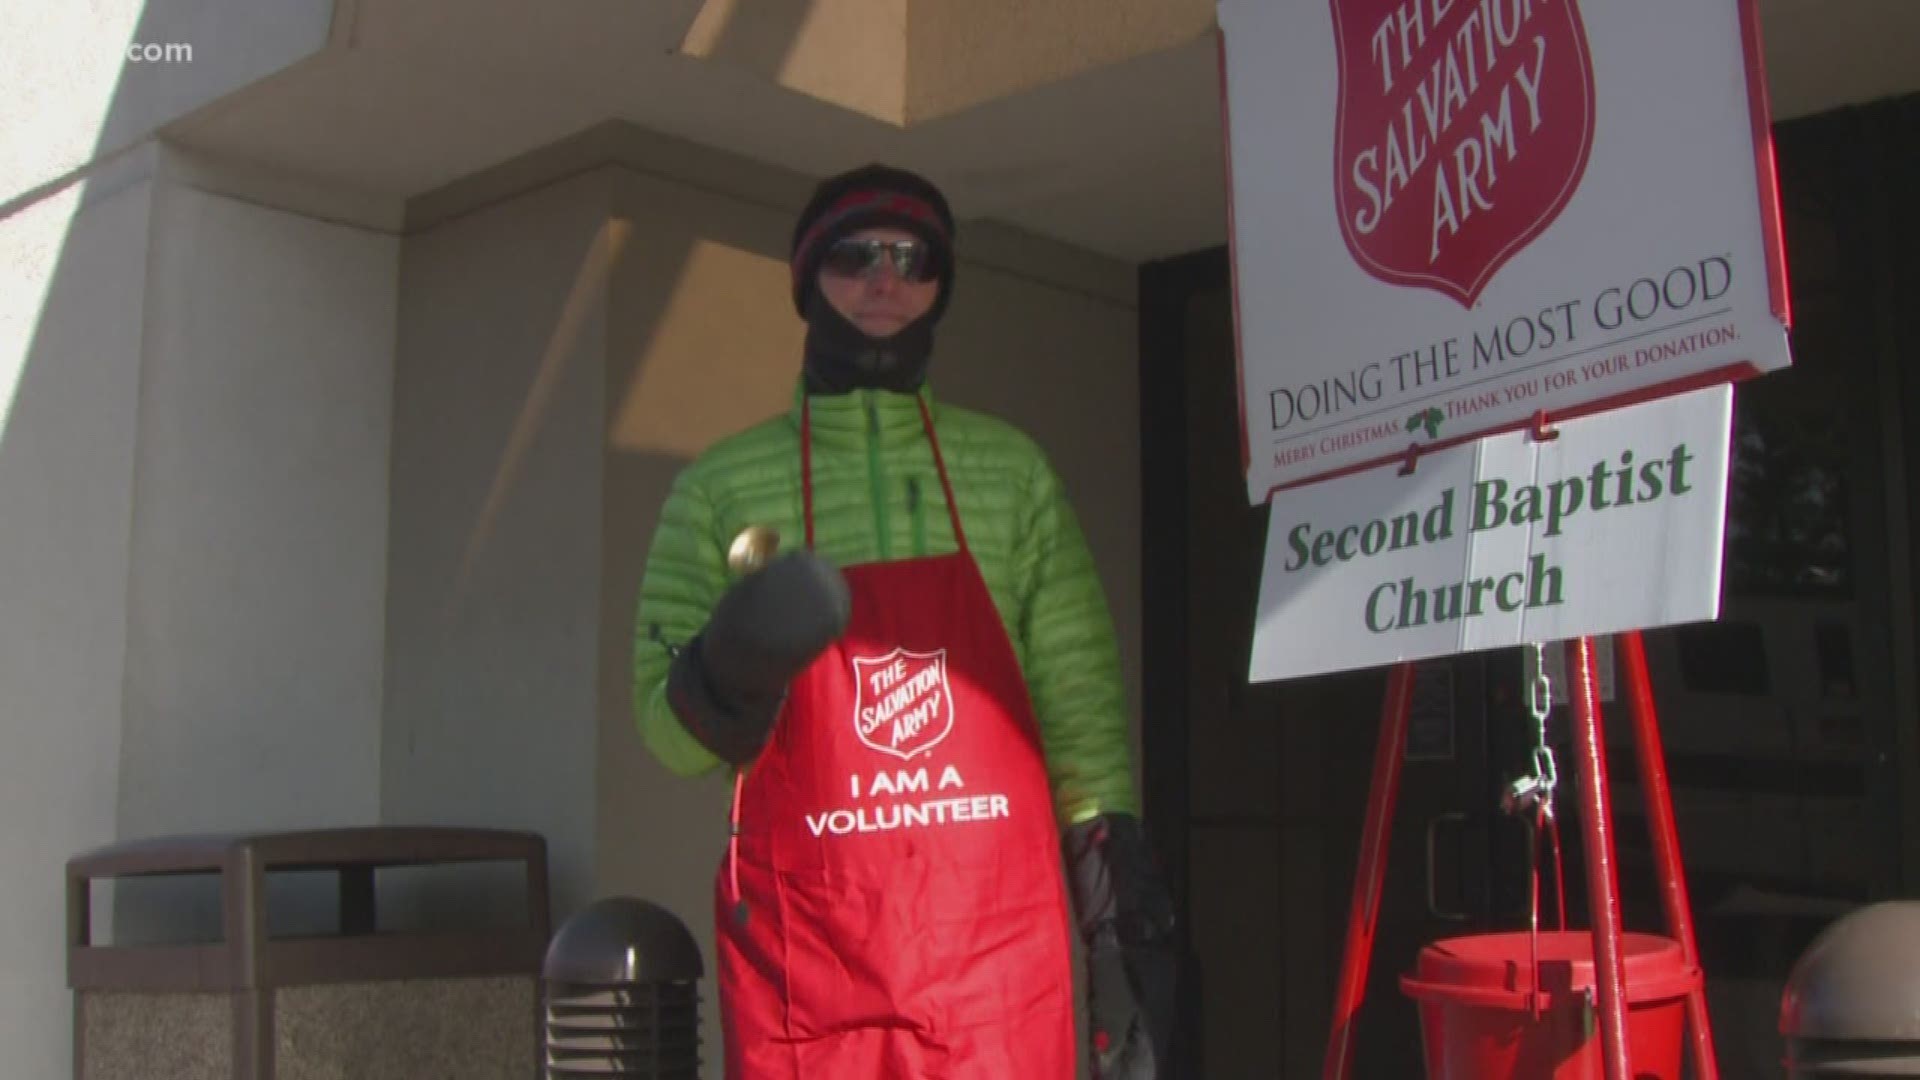 Volunteers are needed to ring bells for the Red Kettle Campaign or register families for the Angel Tree Program.